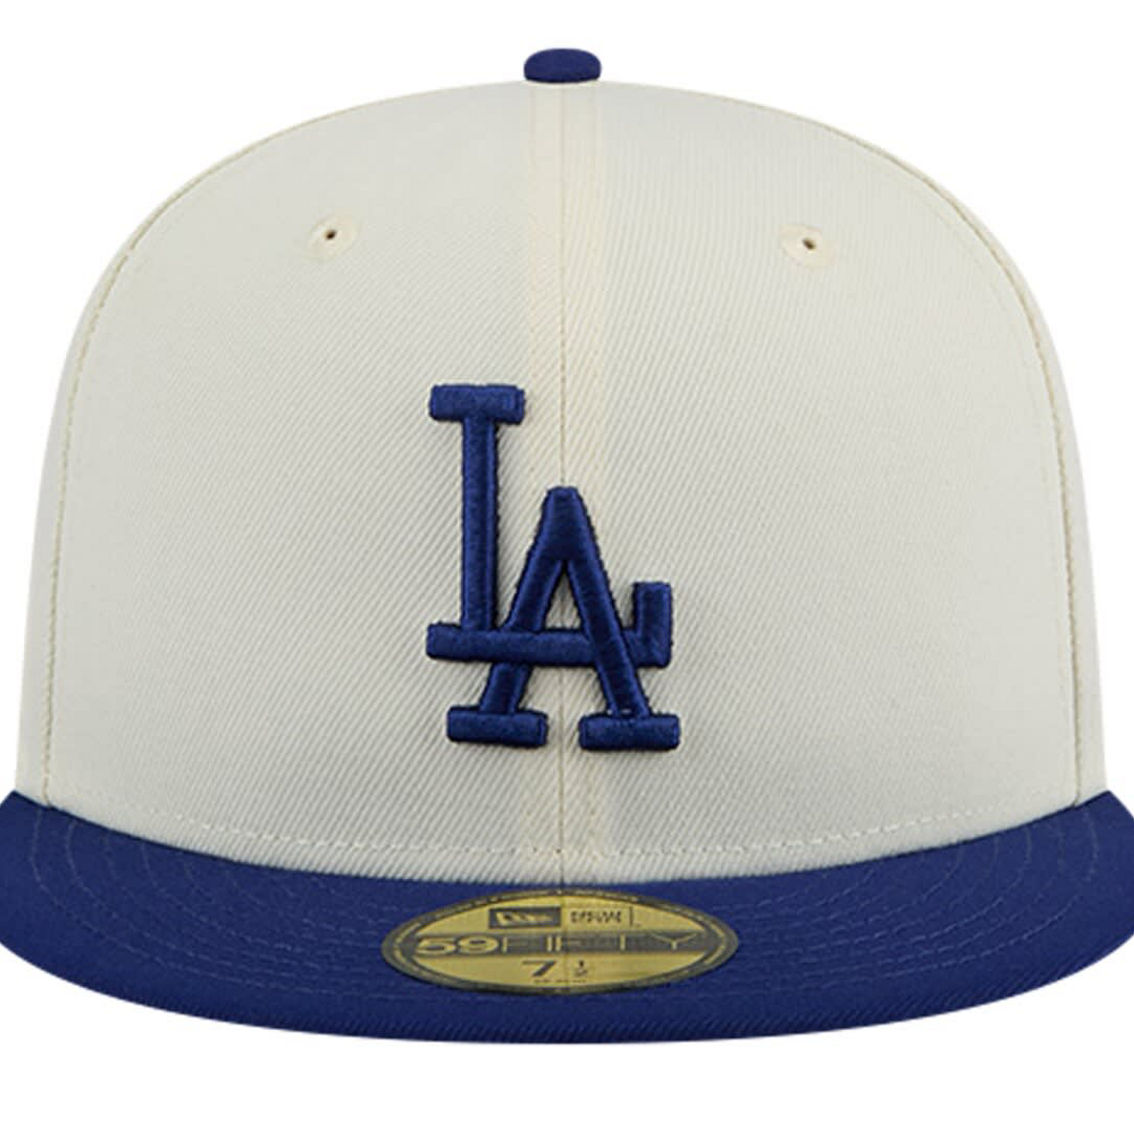 New Era Men's Cream Los Angeles Dodgers Evergreen Chrome 59FIFTY Fitted Hat - Image 3 of 4